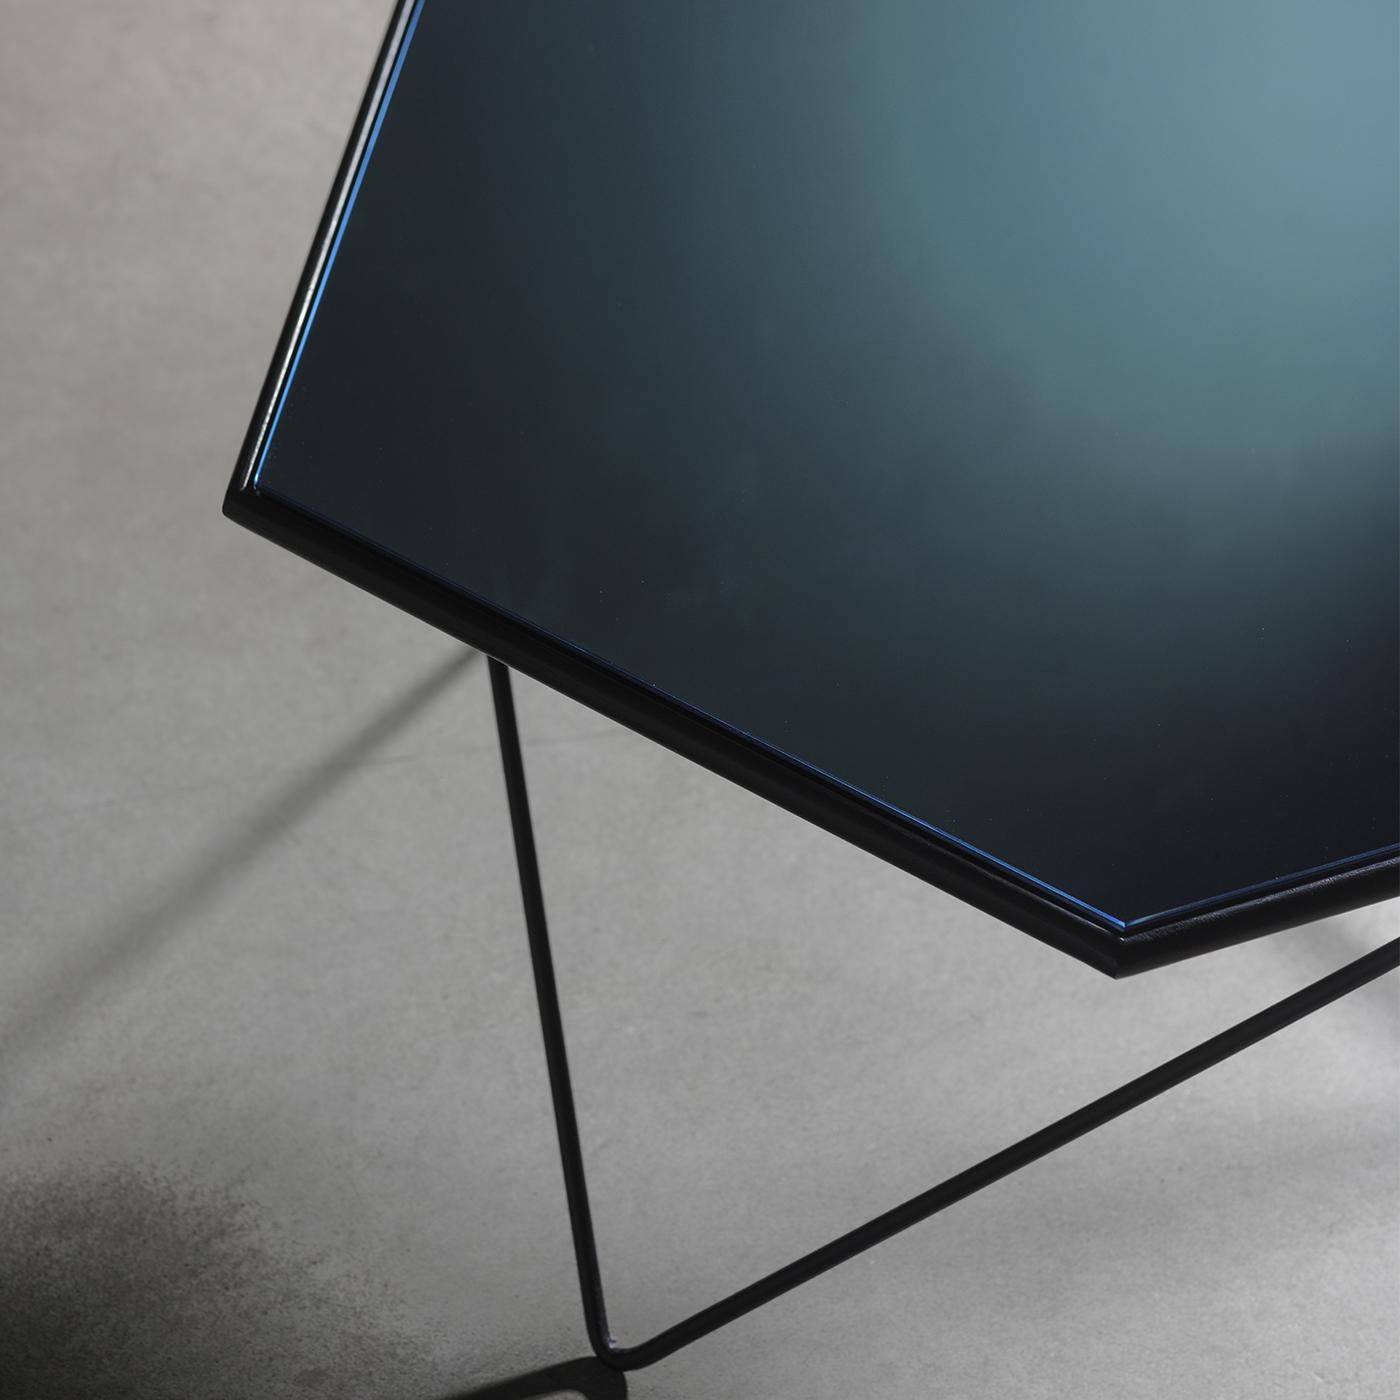 This unique, extremely modern coffee table stands out due to its geometric shapes and use of sleek materials. Its black metal base offers a play on thin, criss-crossing lines, while its hexagonal top features a serene, mirrored surface, creating an